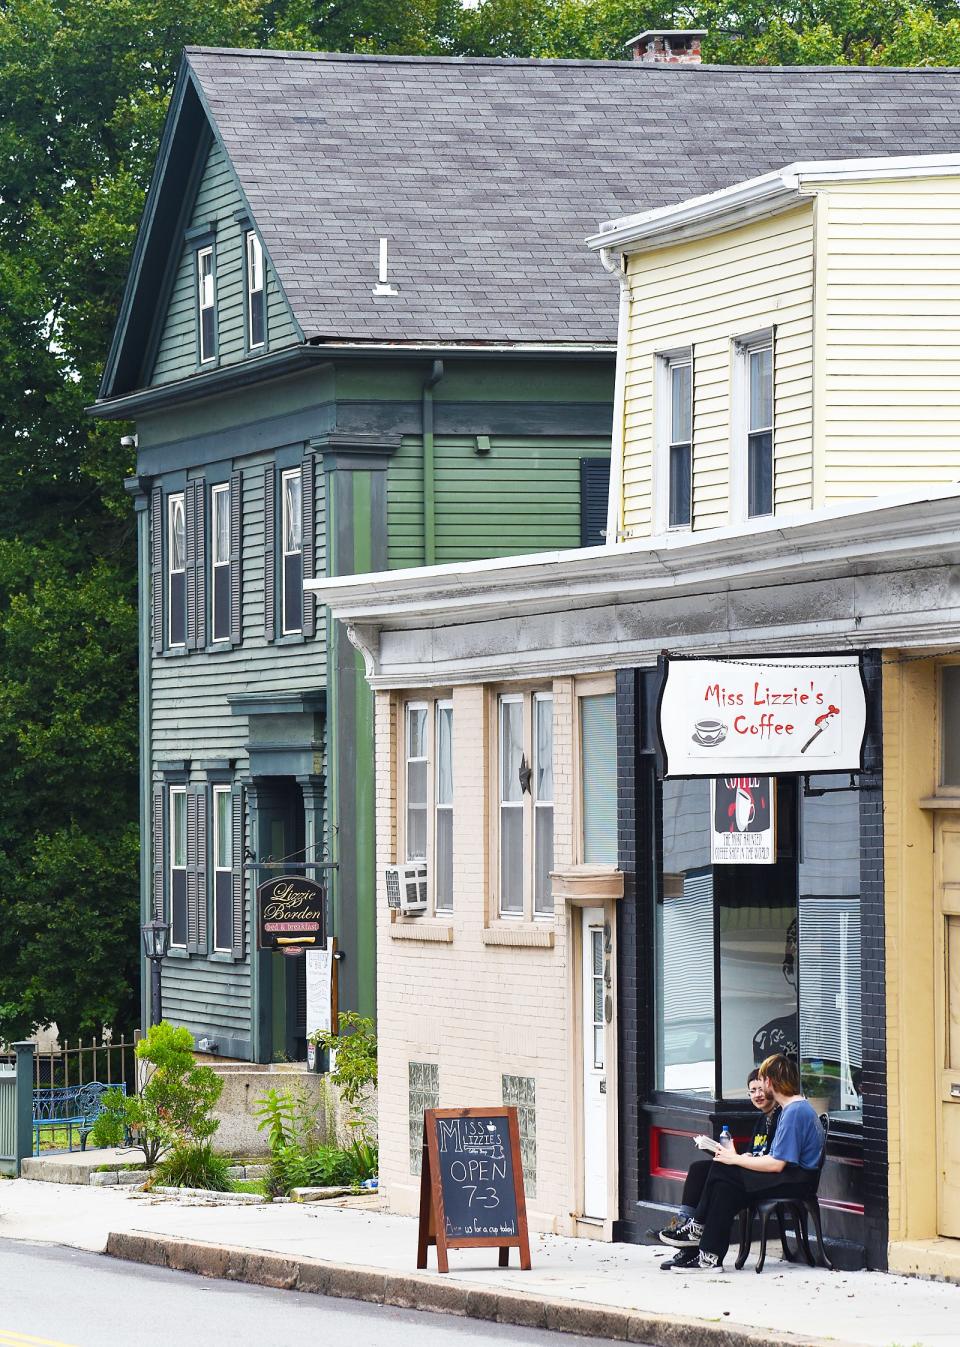 Miss Lizzie's coffee shop recently opened near the Lizzie Borden house in Fall River.